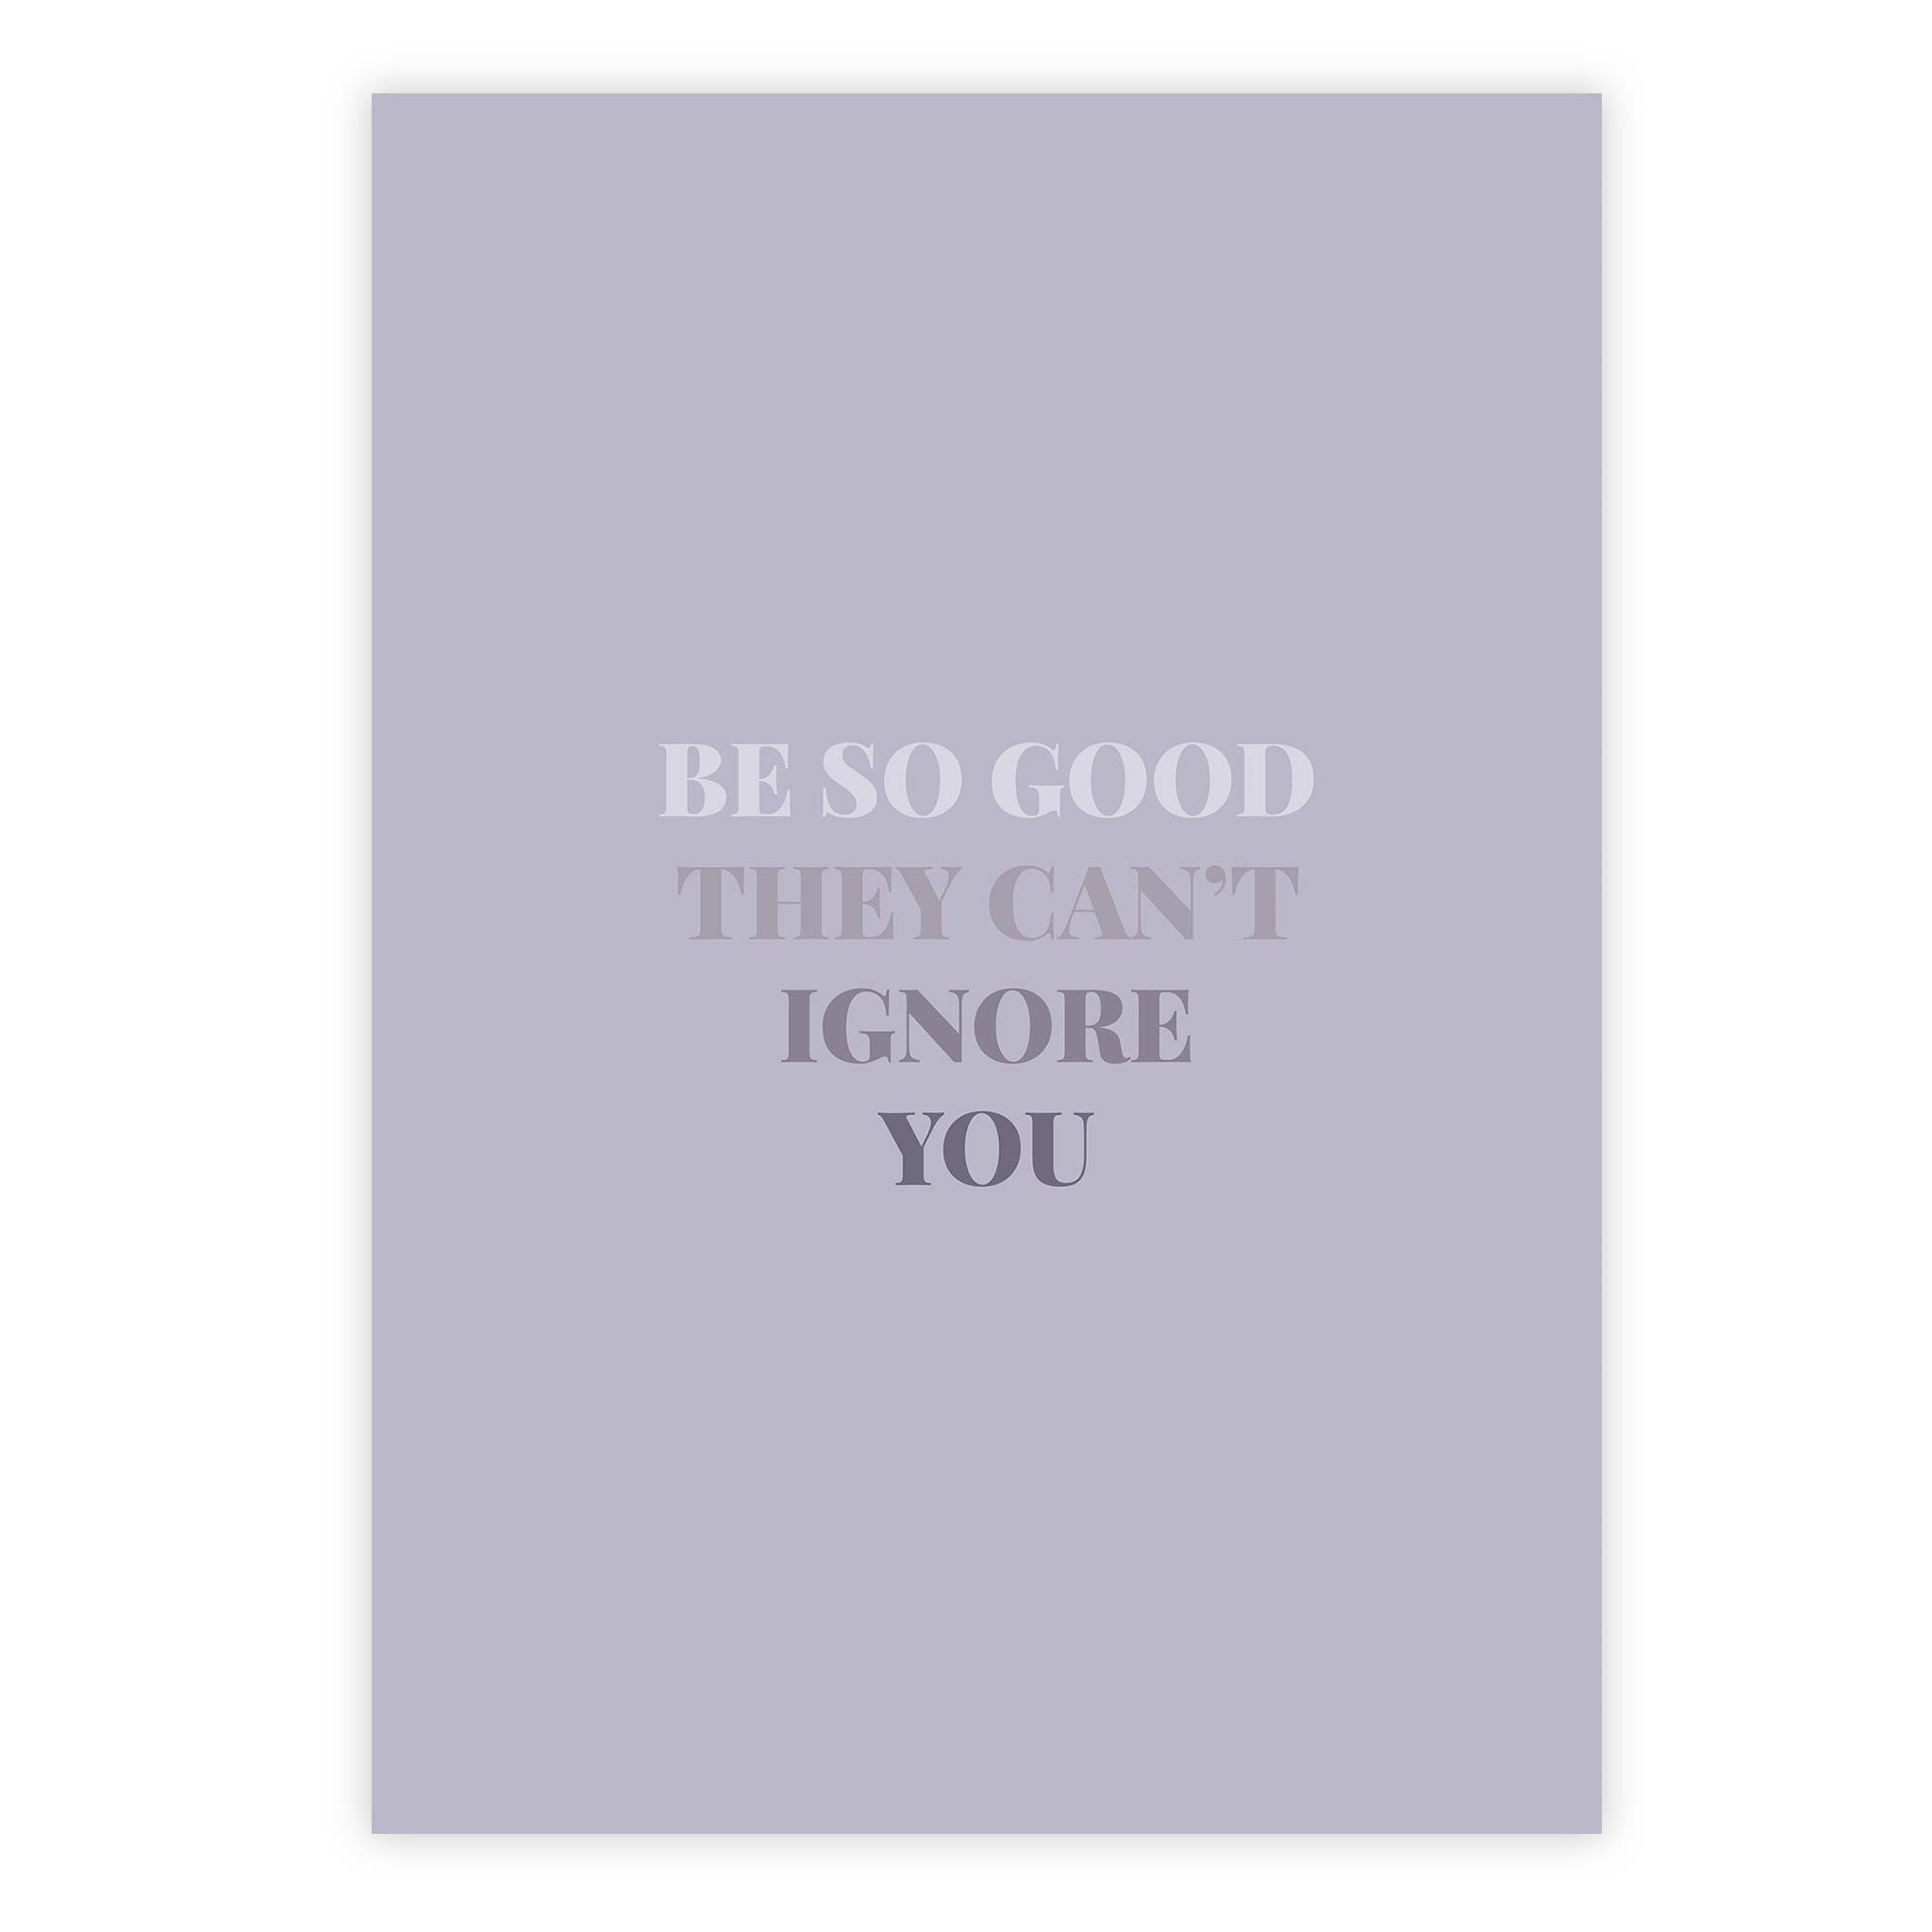 Be so good they can’t ignore you